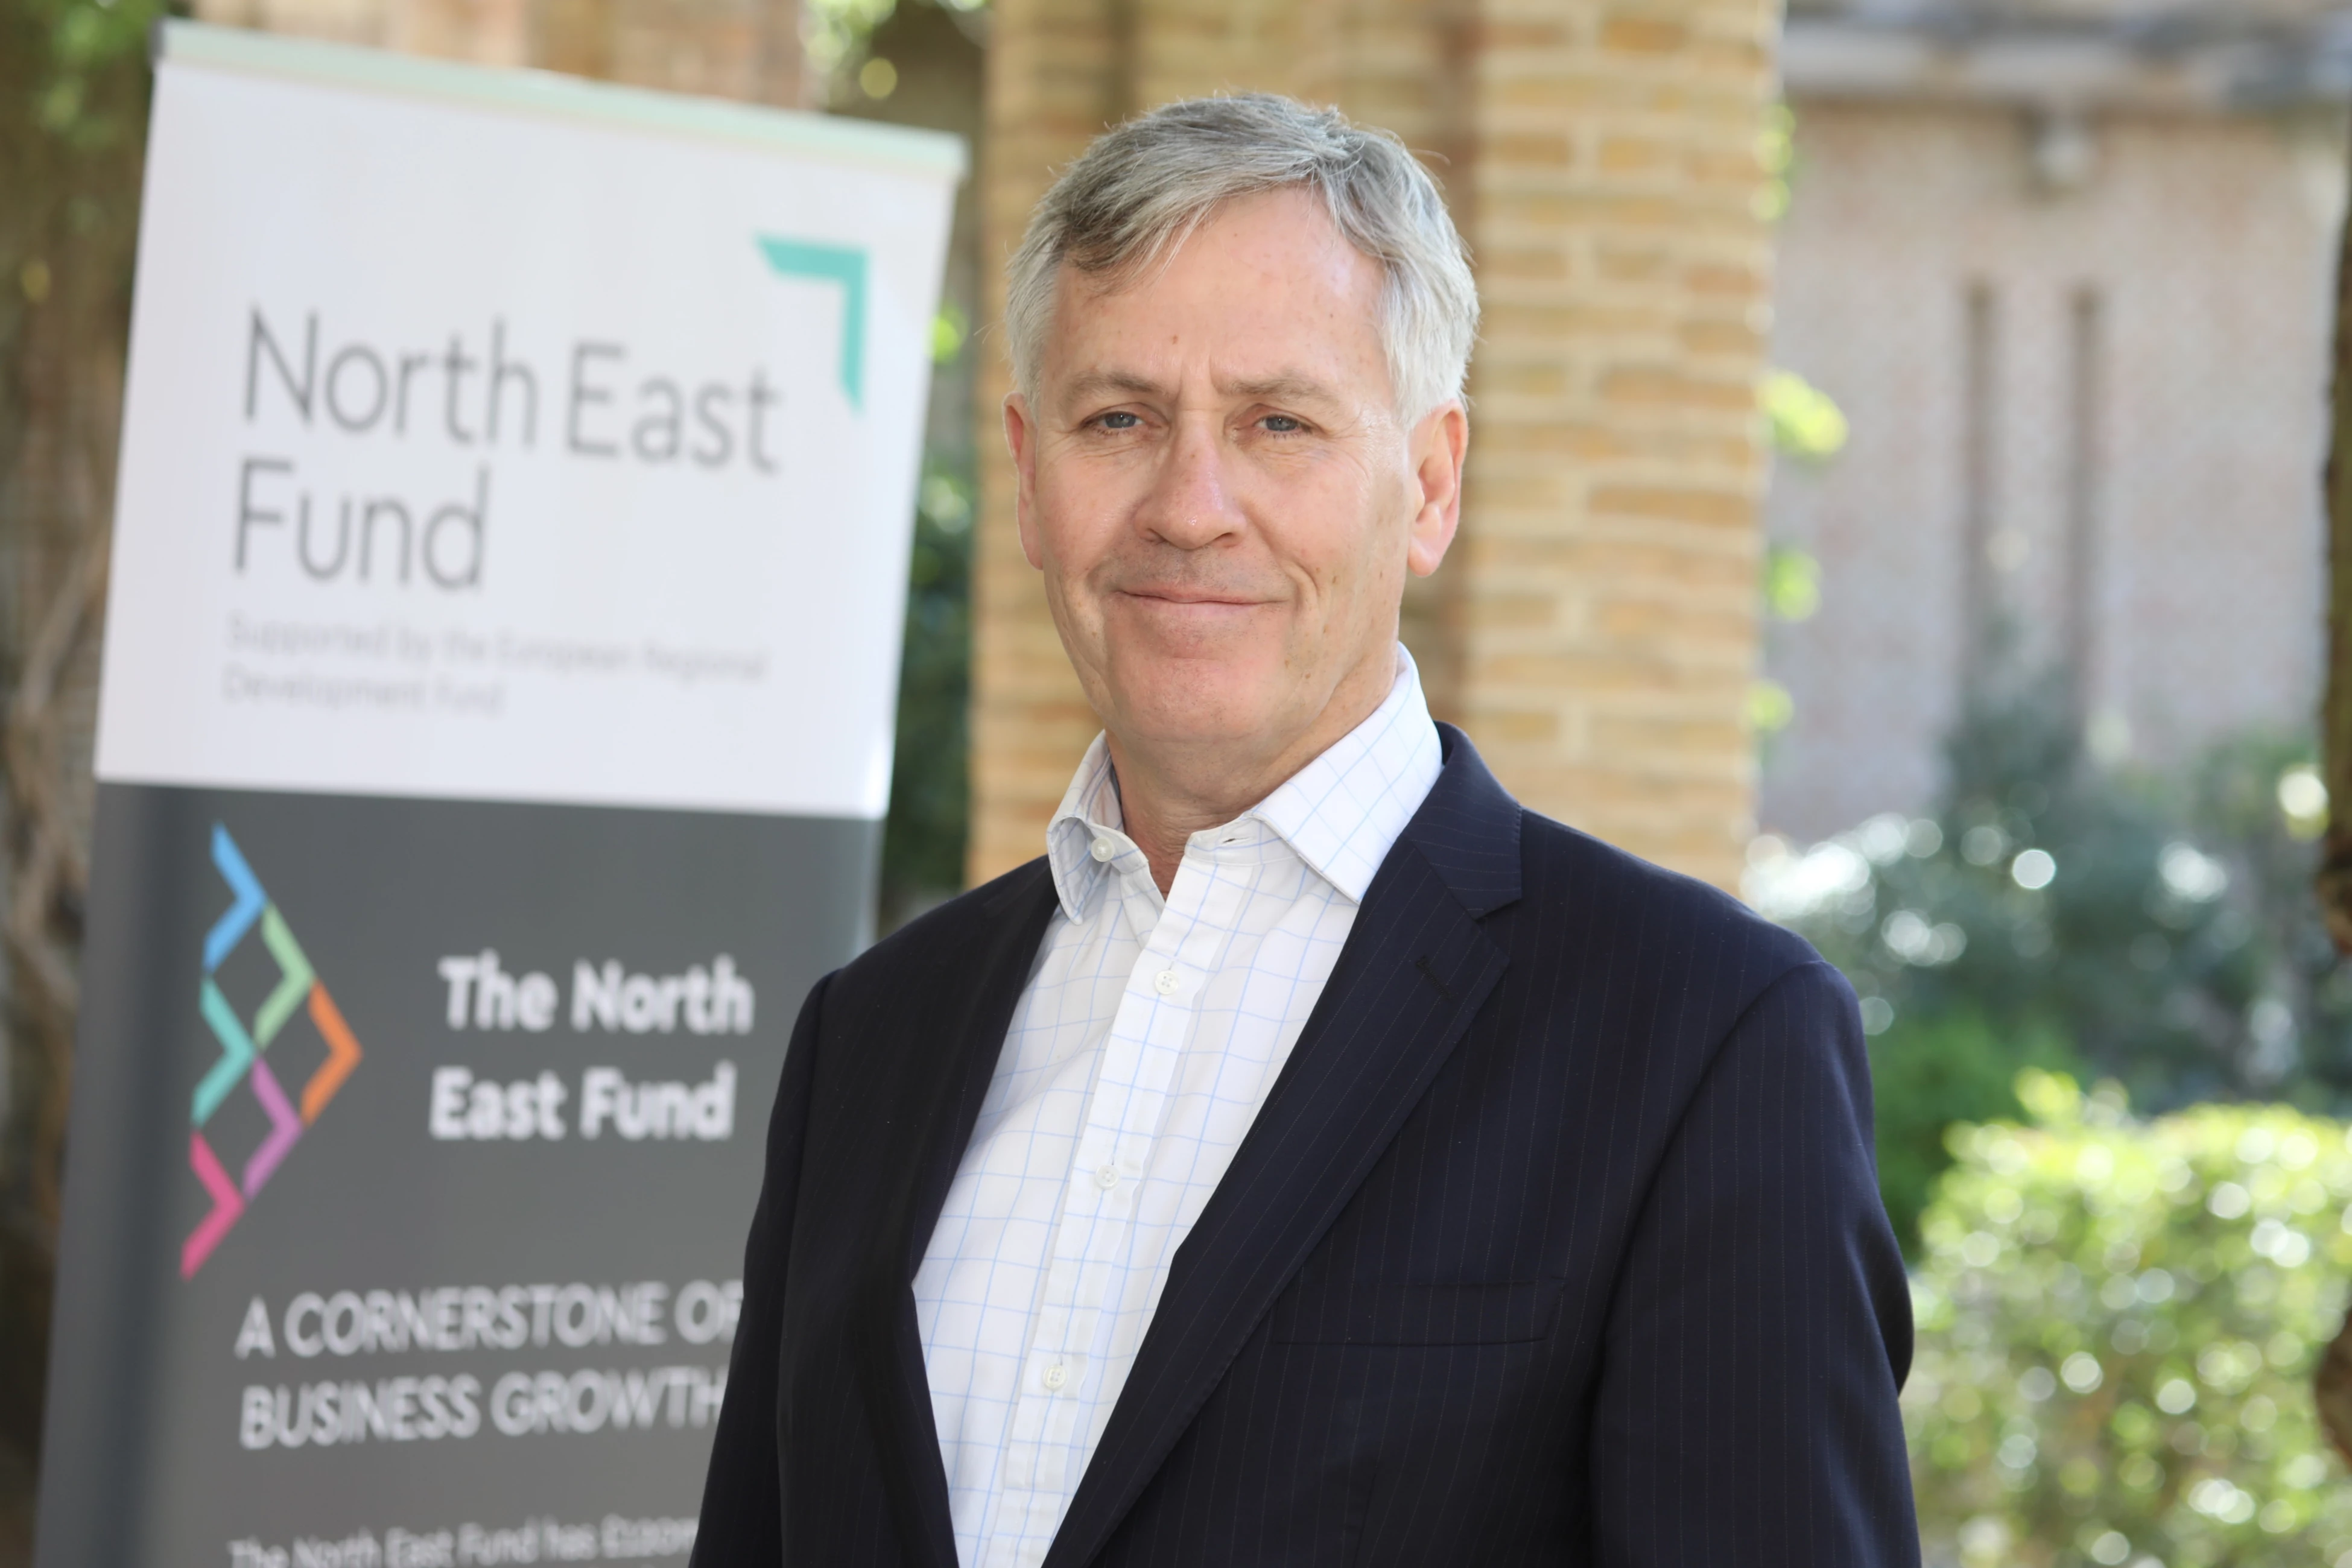 Andrew Mitchell, CEO of the North East Fund Limited